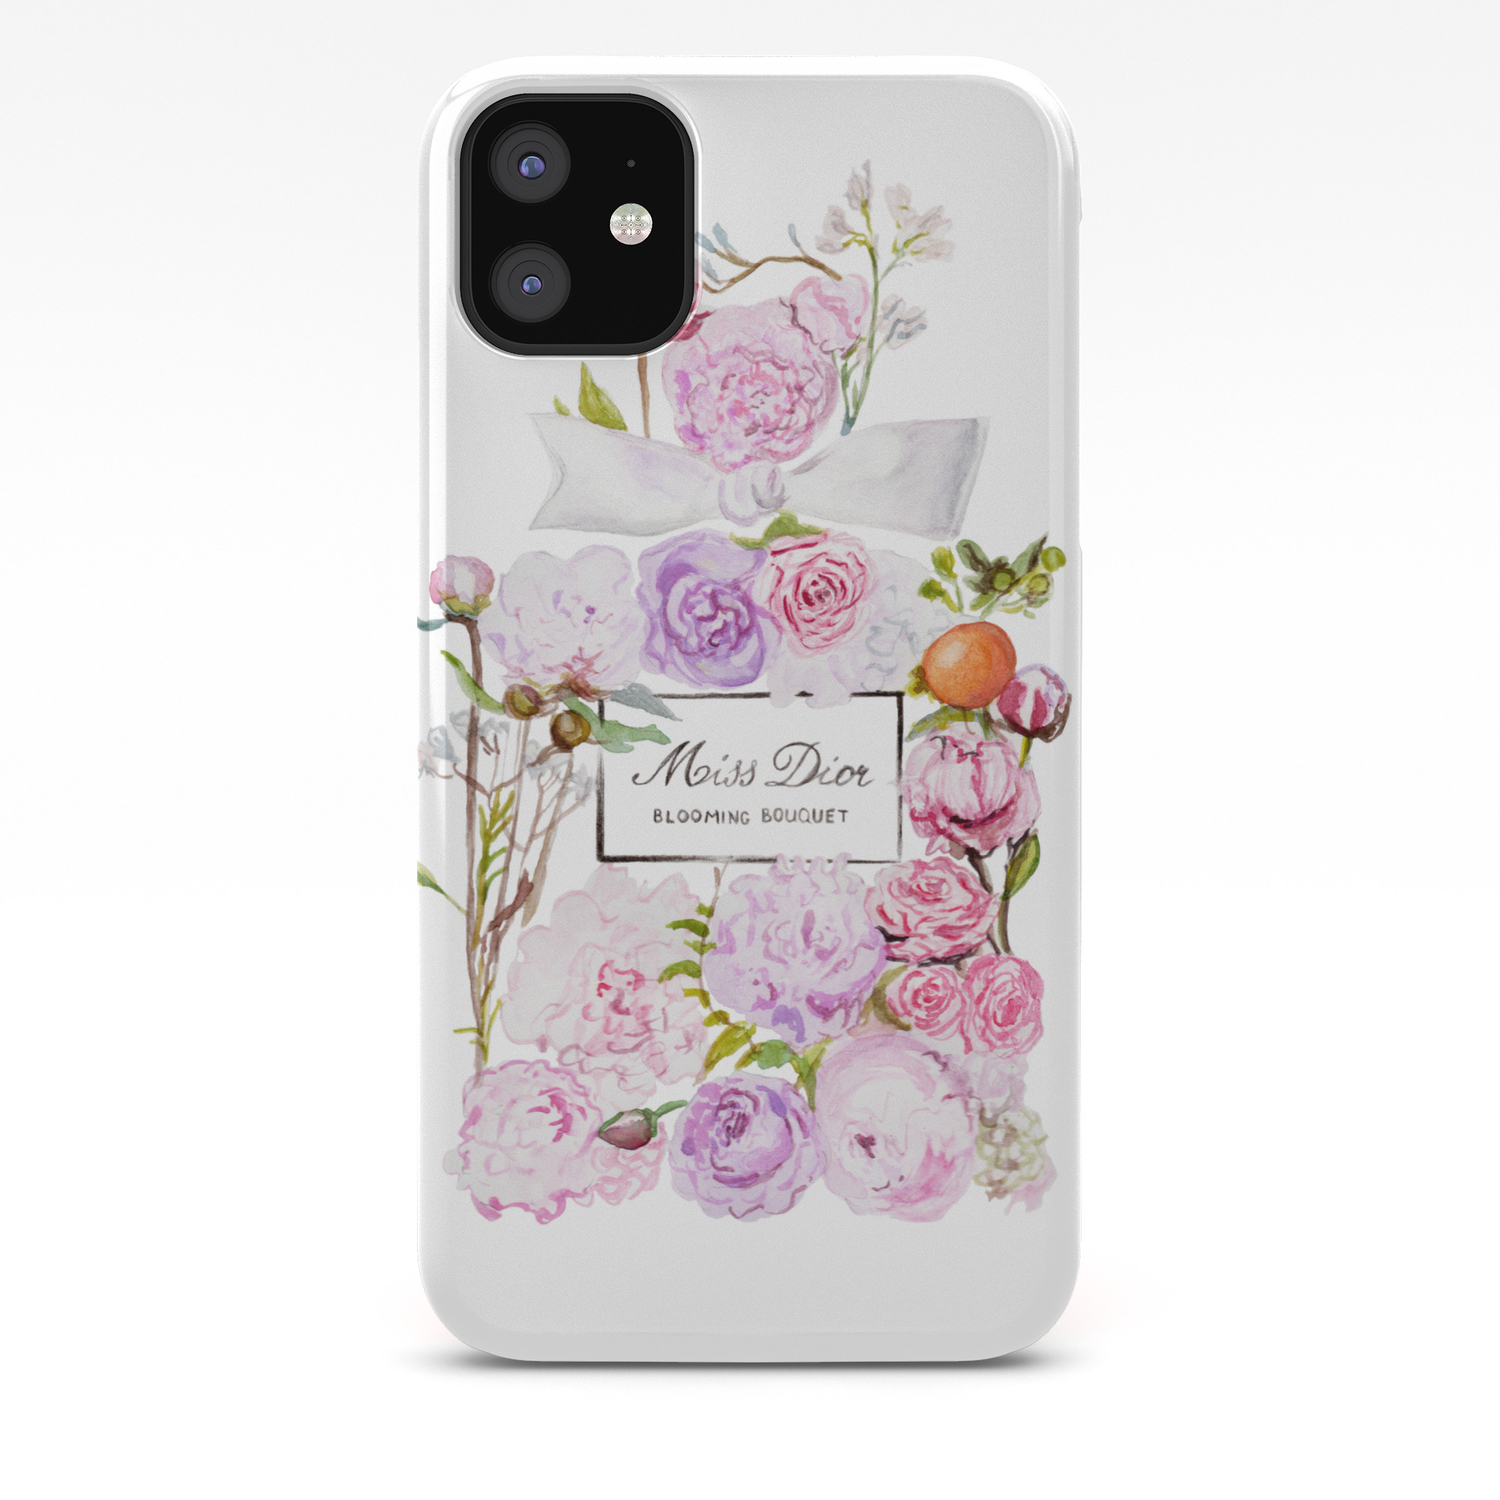 Parfum Perfume Fashion Floral Flowers Blooming Bouquet Iphone Case By Skinny Love Society6